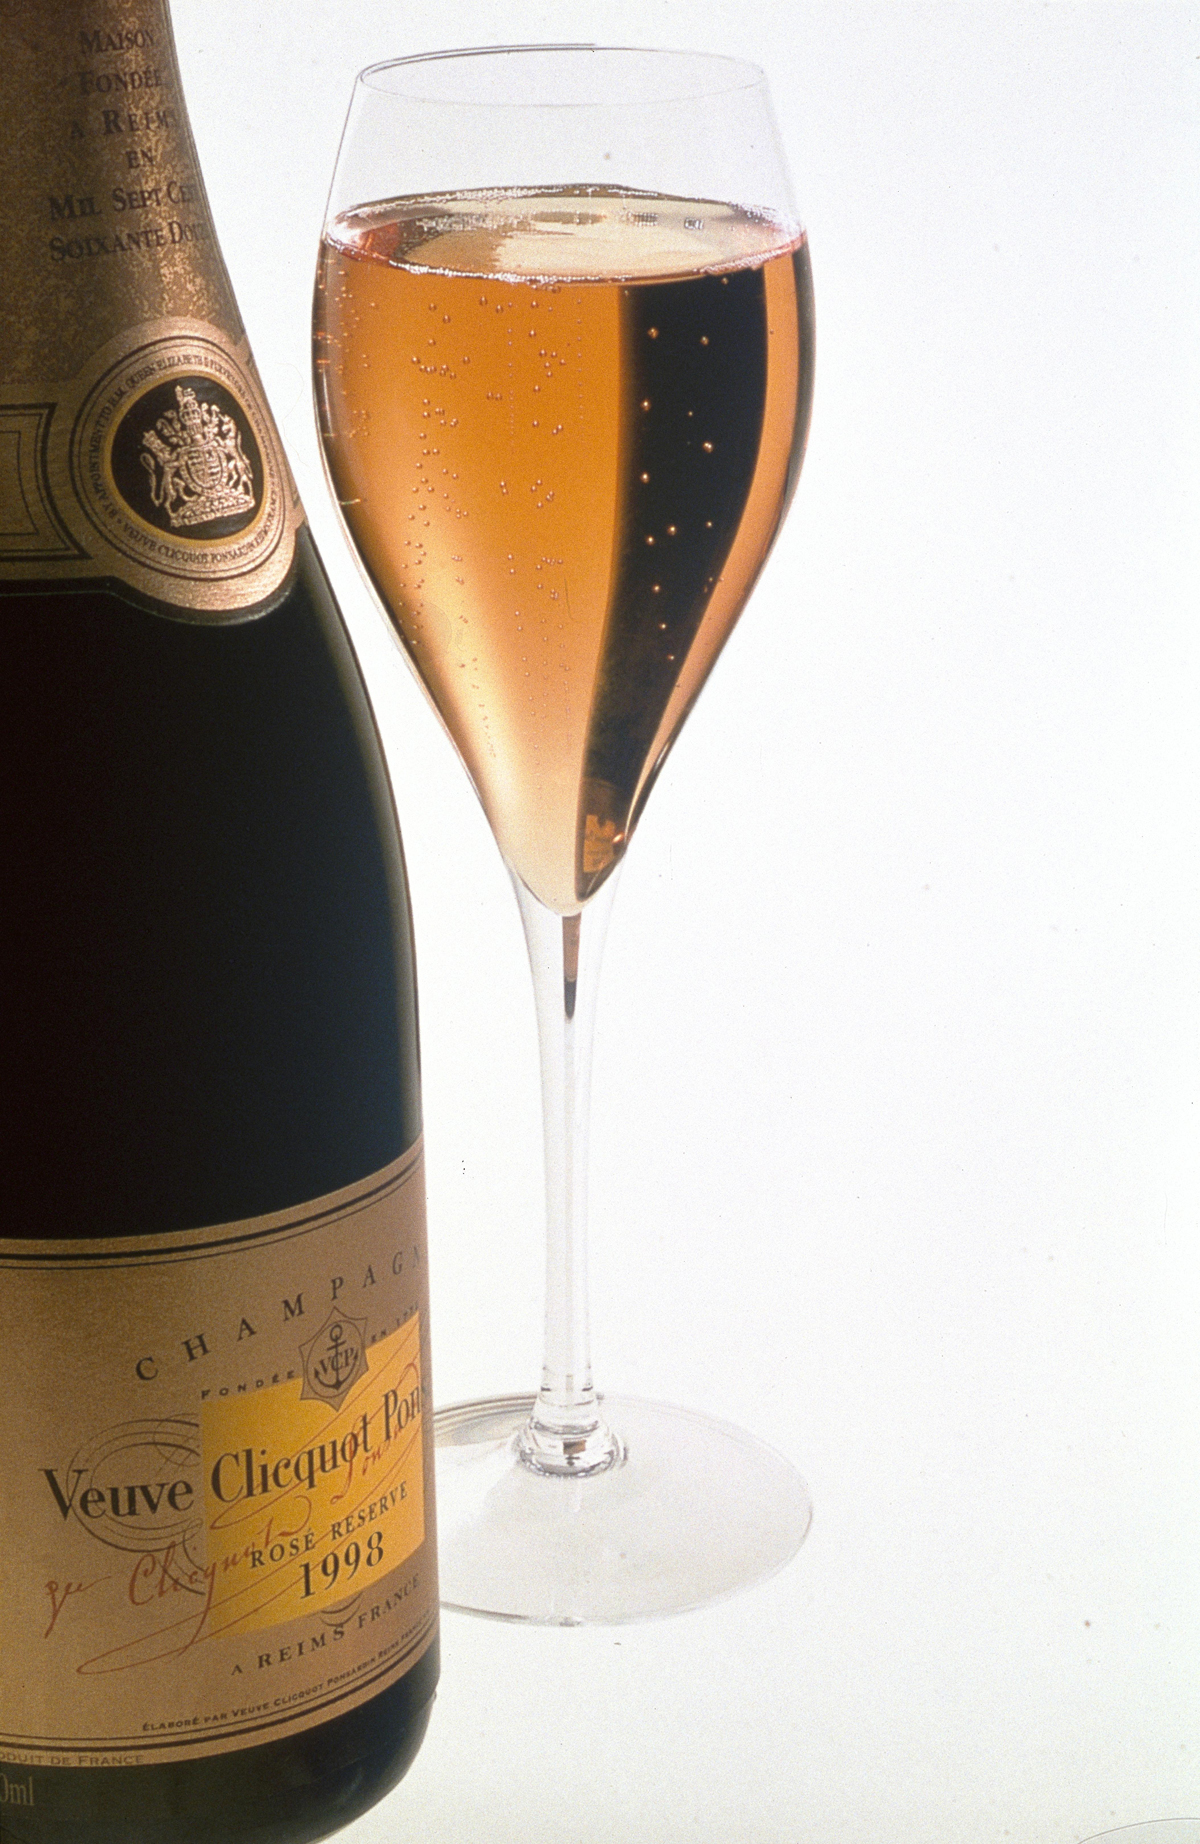 Explore France's champagne capital, the home of Veuve Clicquot's